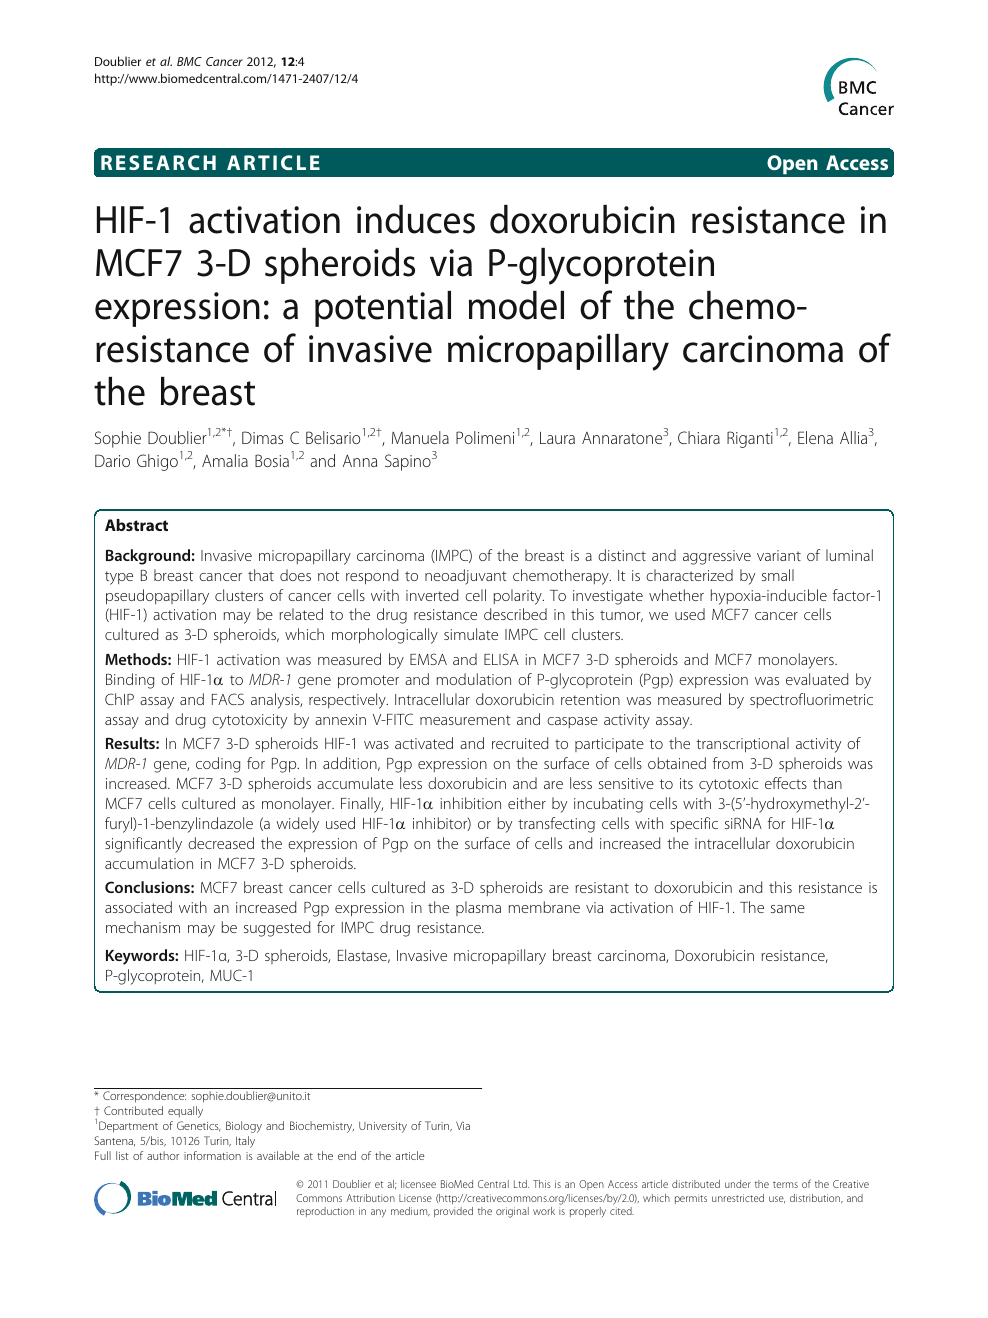 Hif 1 Activation Induces Doxorubicin Resistance In Mcf7 3 D Spheroids Via P Glycoprotein Expression A Potential Model Of The Chemo Resistance Of Invasive Micropapillary Carcinoma Of The Breast Topic Of Research Paper In Biological